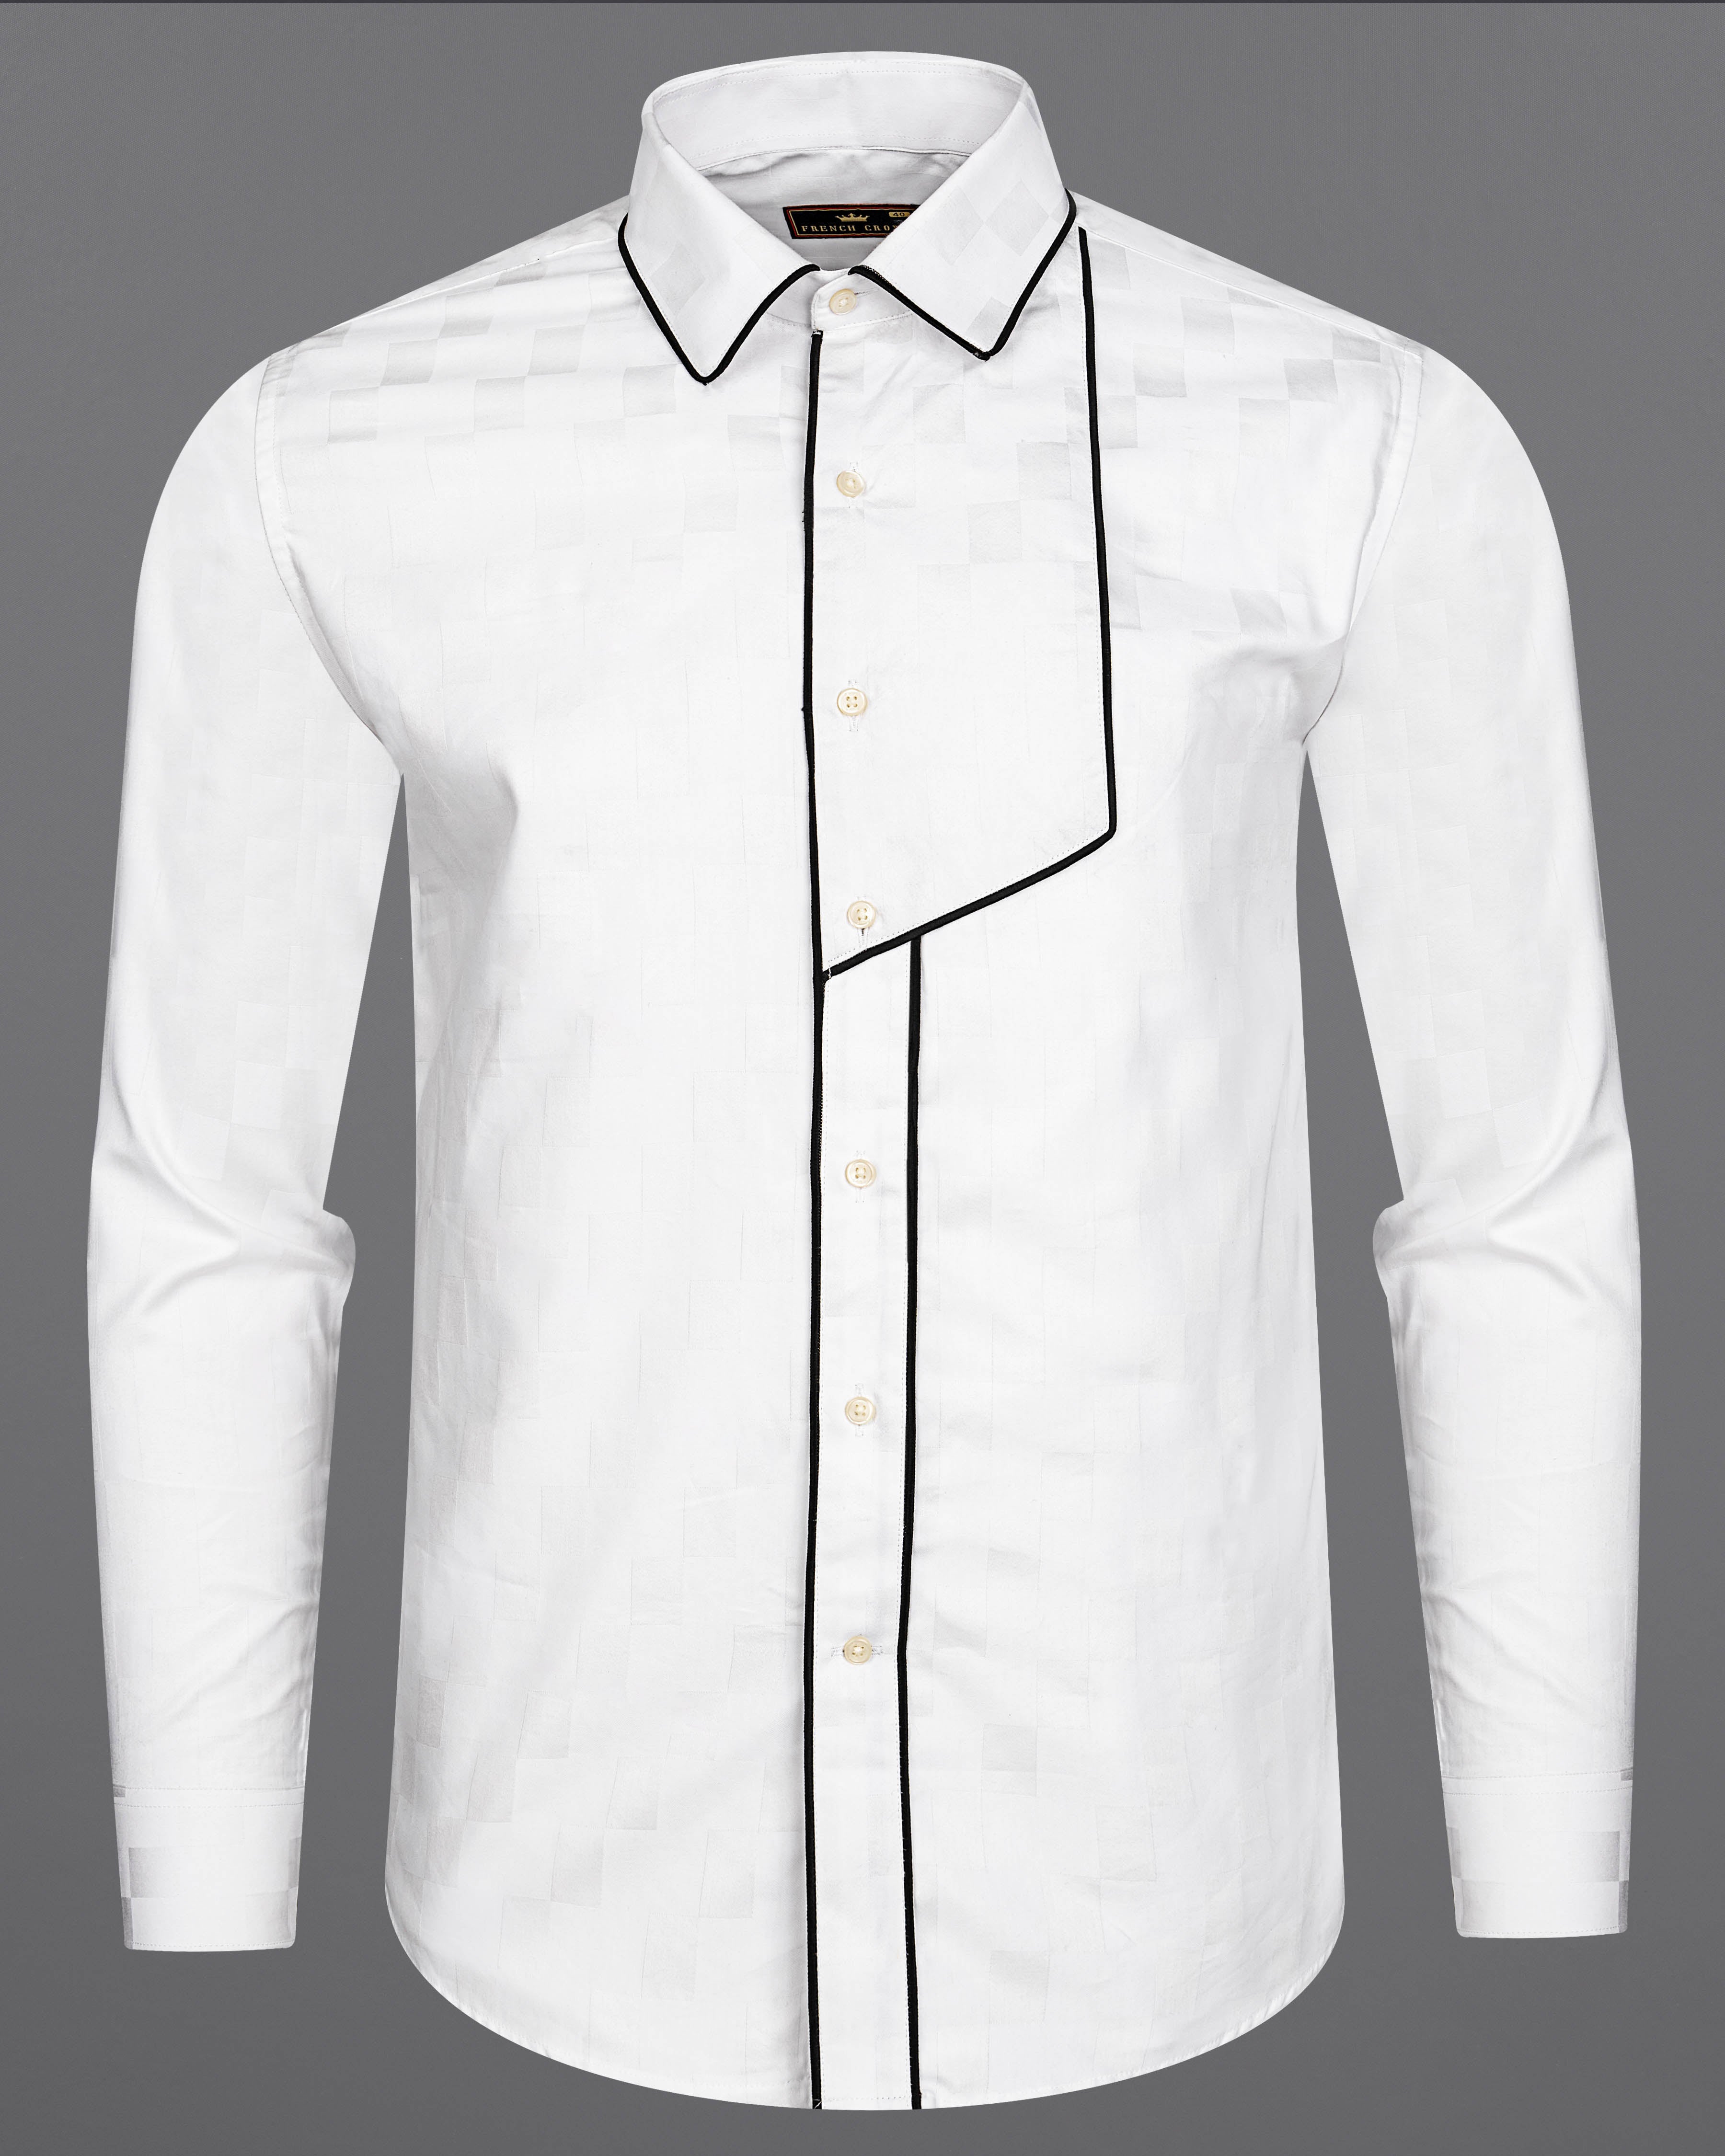 Bright White with Black Piping Work Dobby Premium Giza Cotton Designer Shirt 9107-P410-38,9107-P410-H-38,9107-P410-39,9107-P410-H-39,9107-P410-40,9107-P410-H-40,9107-P410-42,9107-P410-H-42,9107-P410-44,9107-P410-H-44,9107-P410-46,9107-P410-H-46,9107-P410-48,9107-P410-H-48,9107-P410-50,9107-P410-H-50,9107-P410-52,9107-P410-H-52